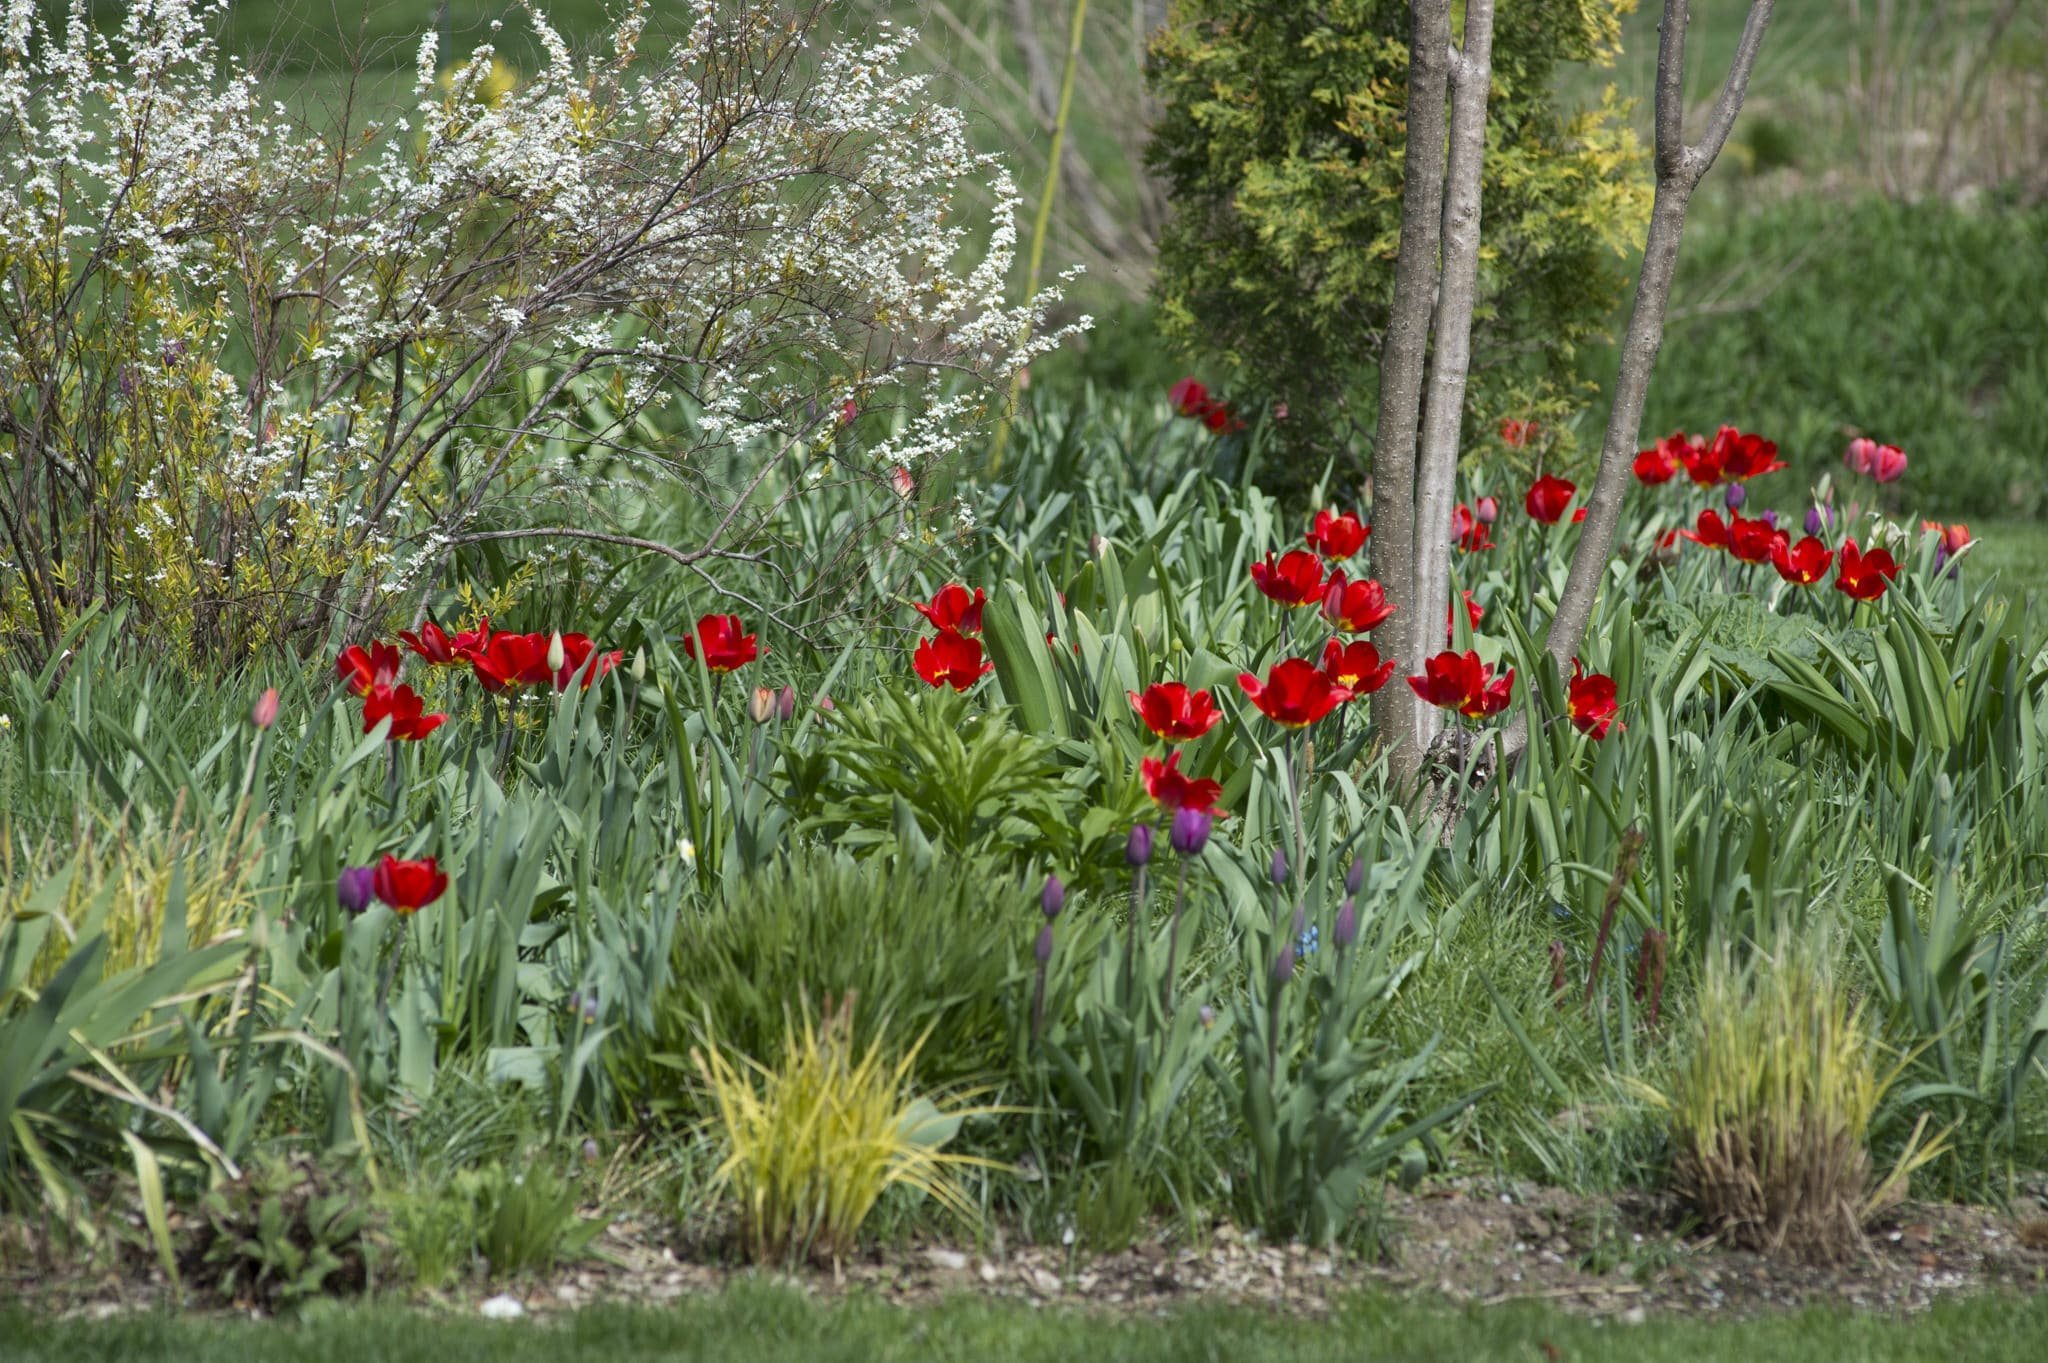 Tulips sprinkled among shrubs and perennials in a naturalistic garden